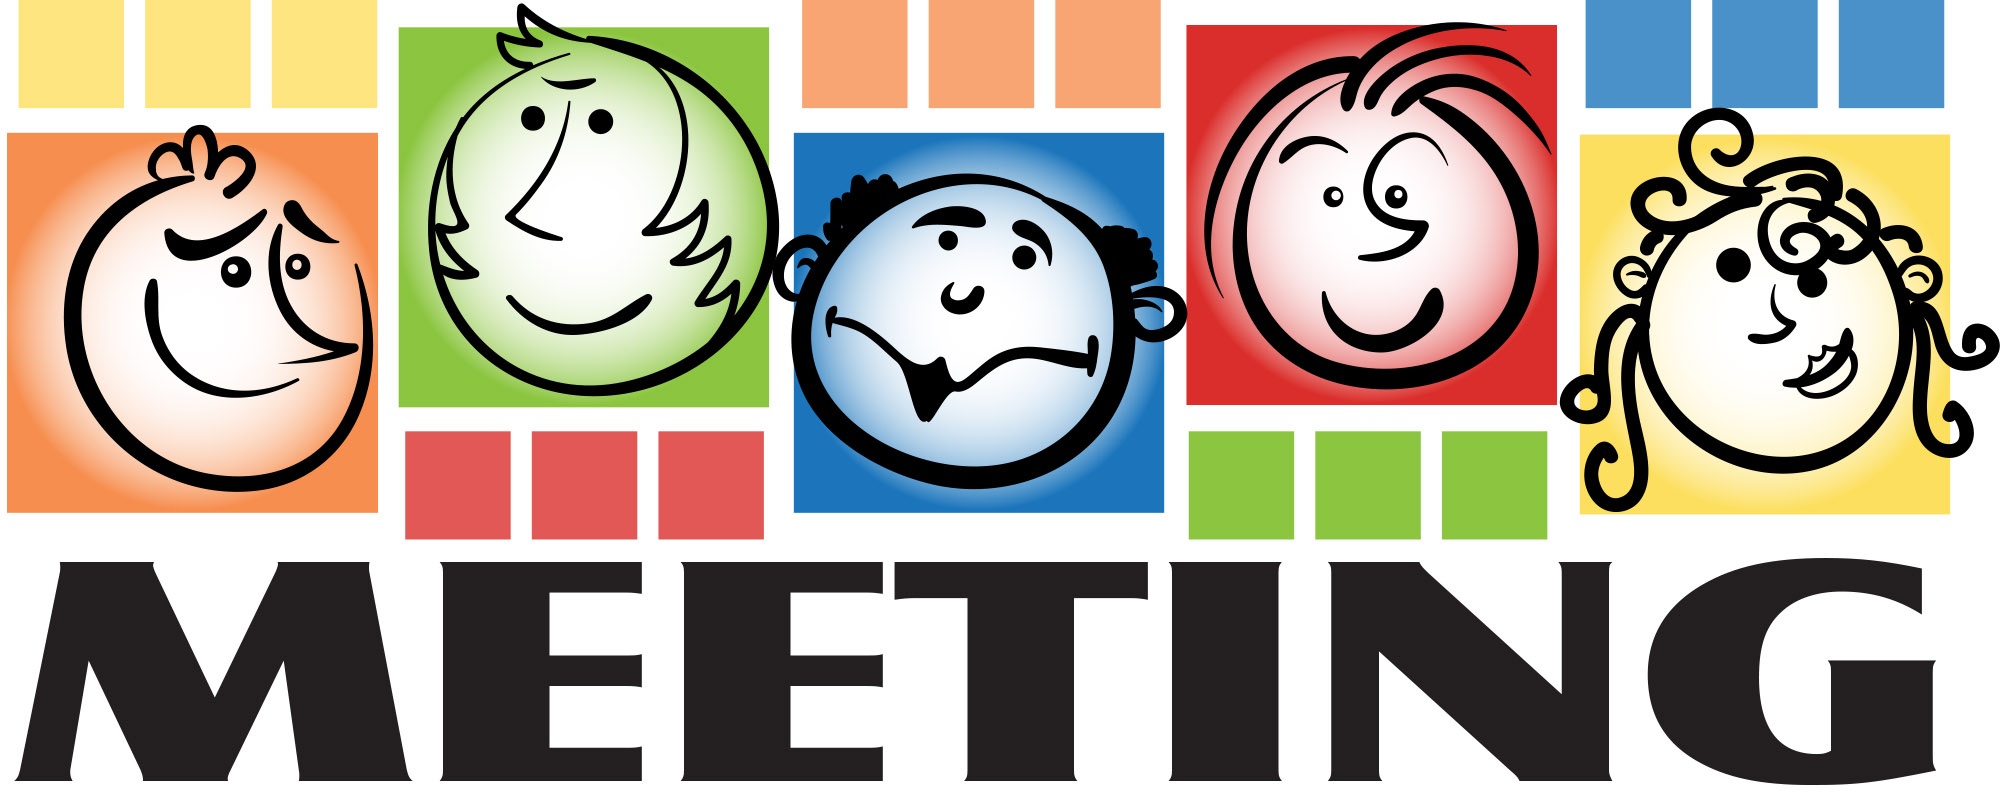 Meeting conference clipart free clipart image image